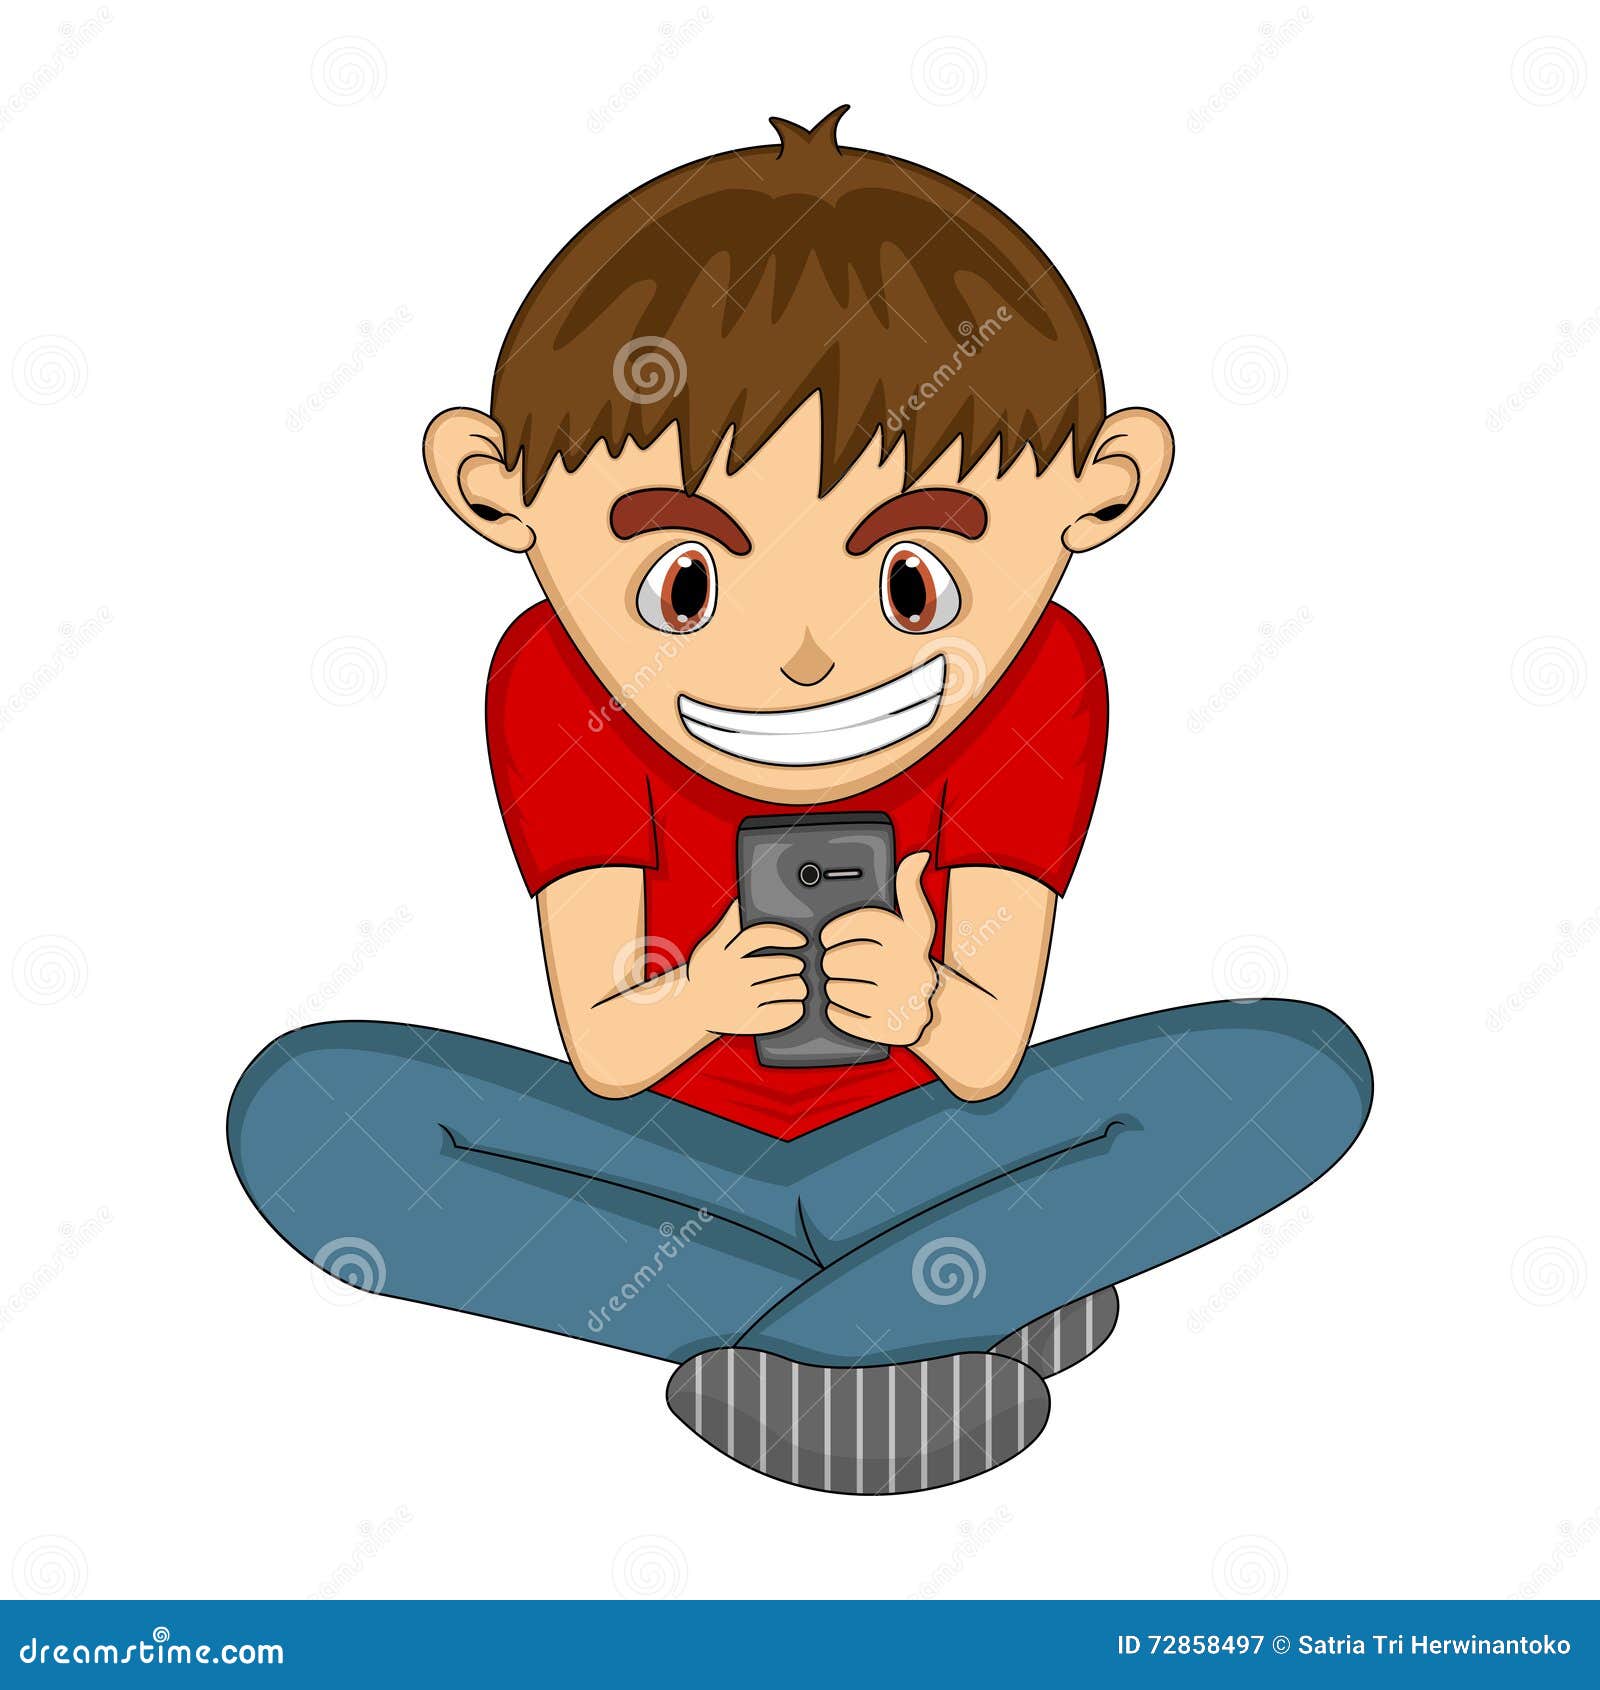 Boy Playing with Mobile Phone Cartoon Stock Vector - Illustration of ...